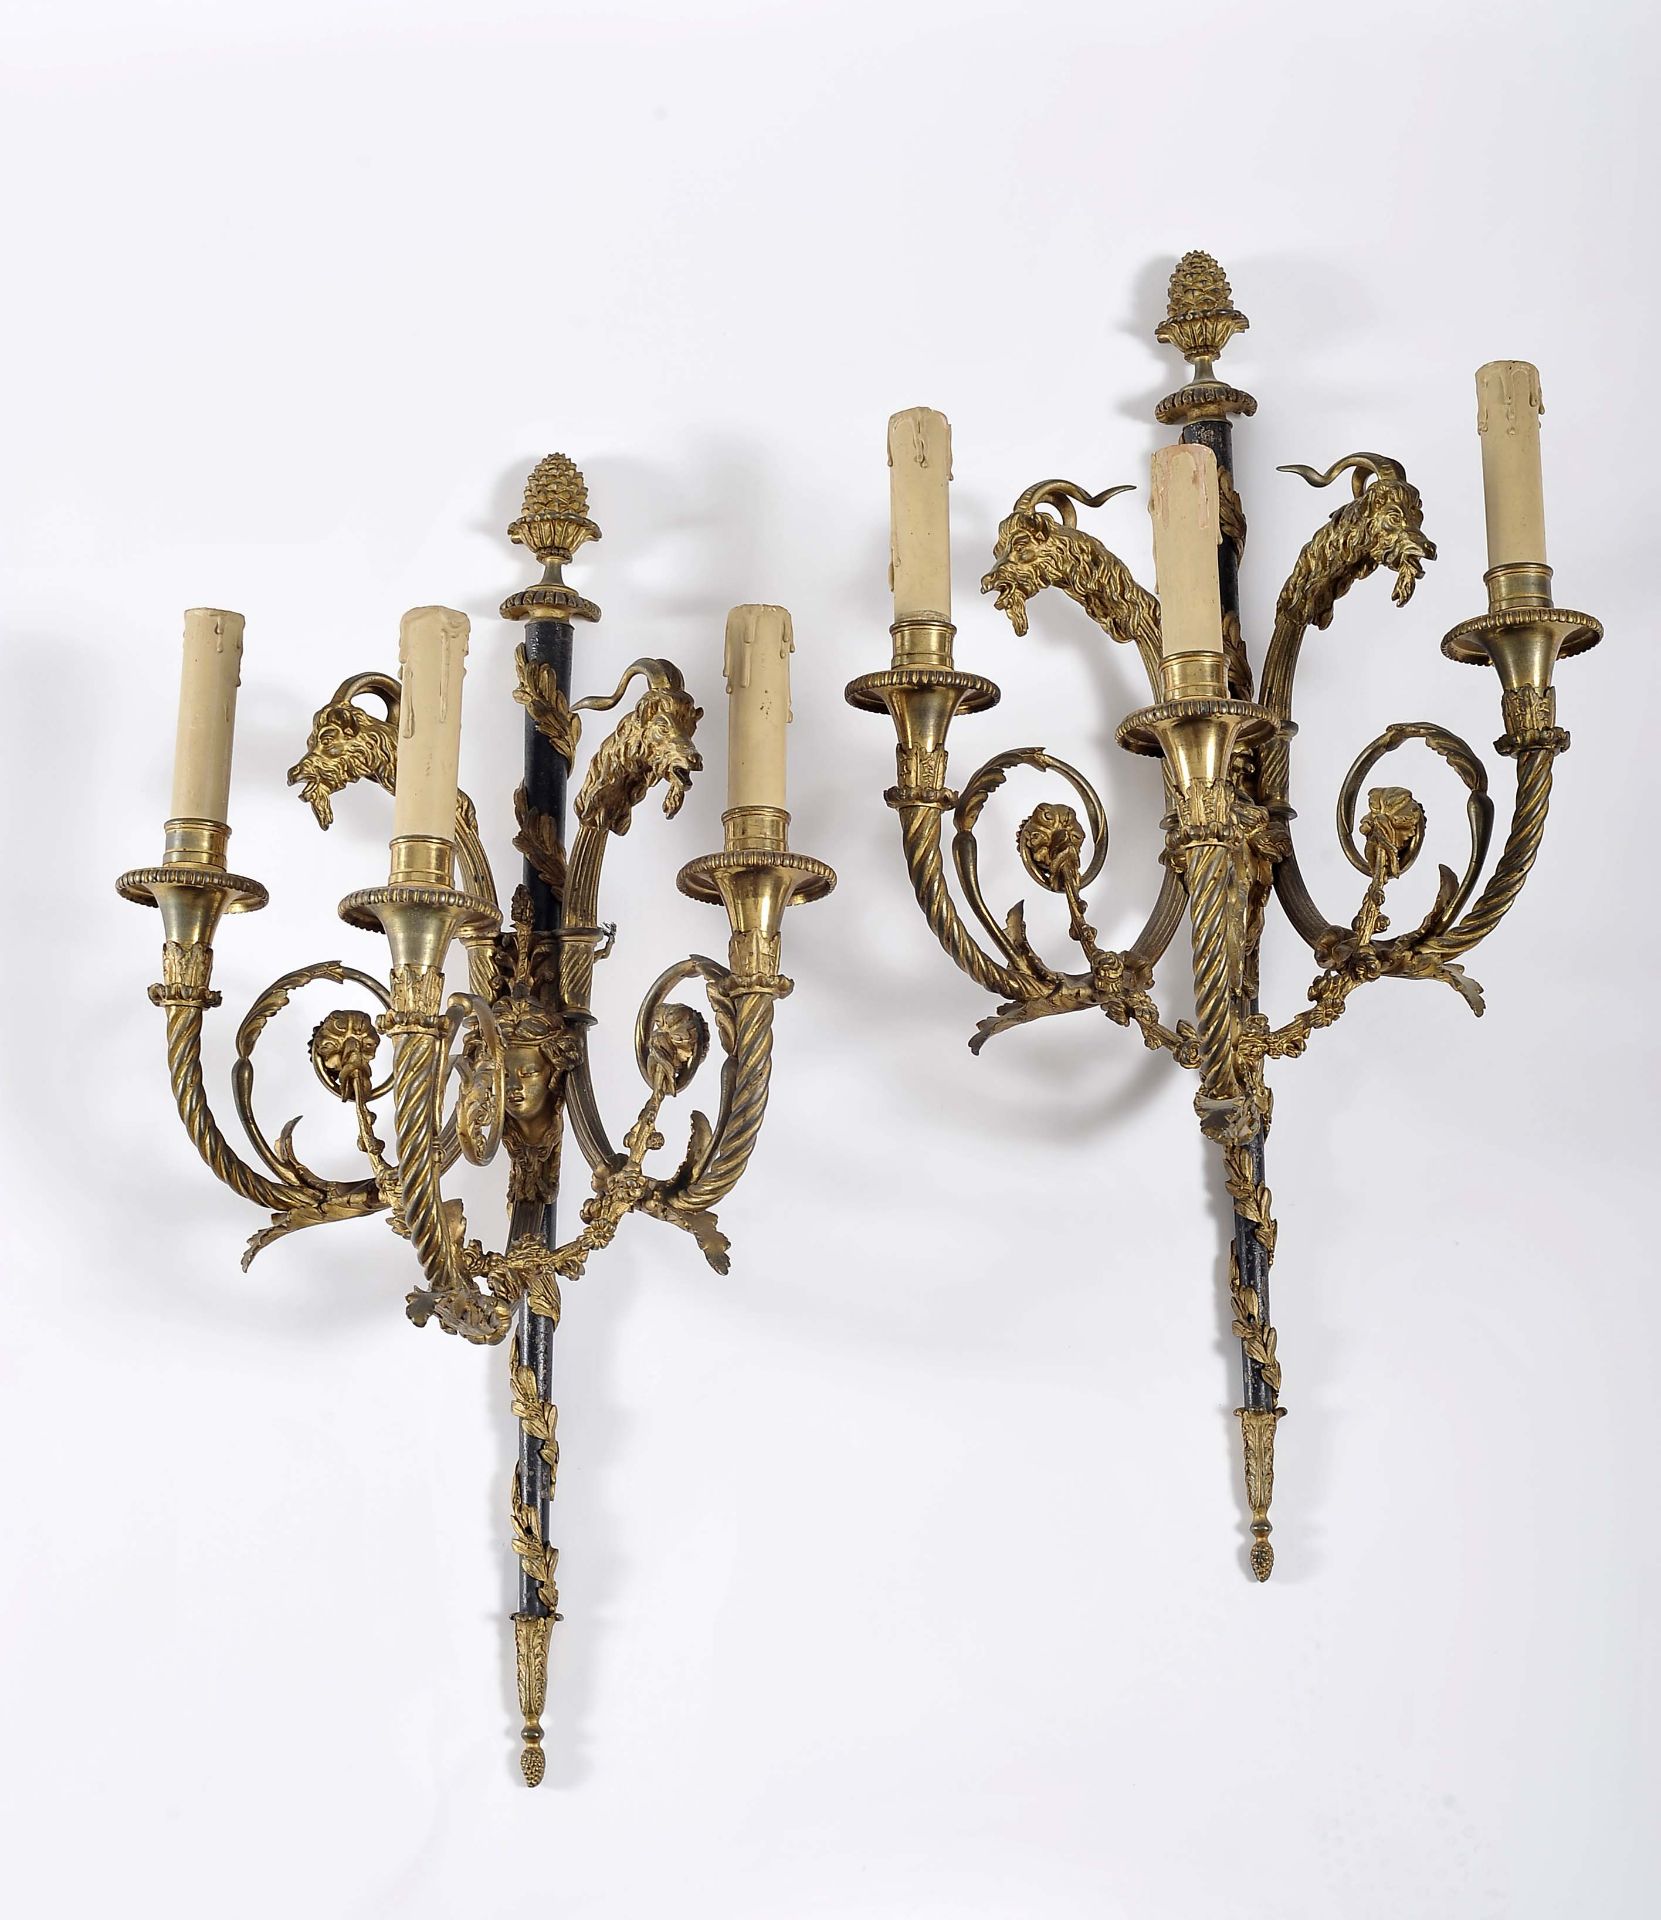 A pair of three-light wall sconces